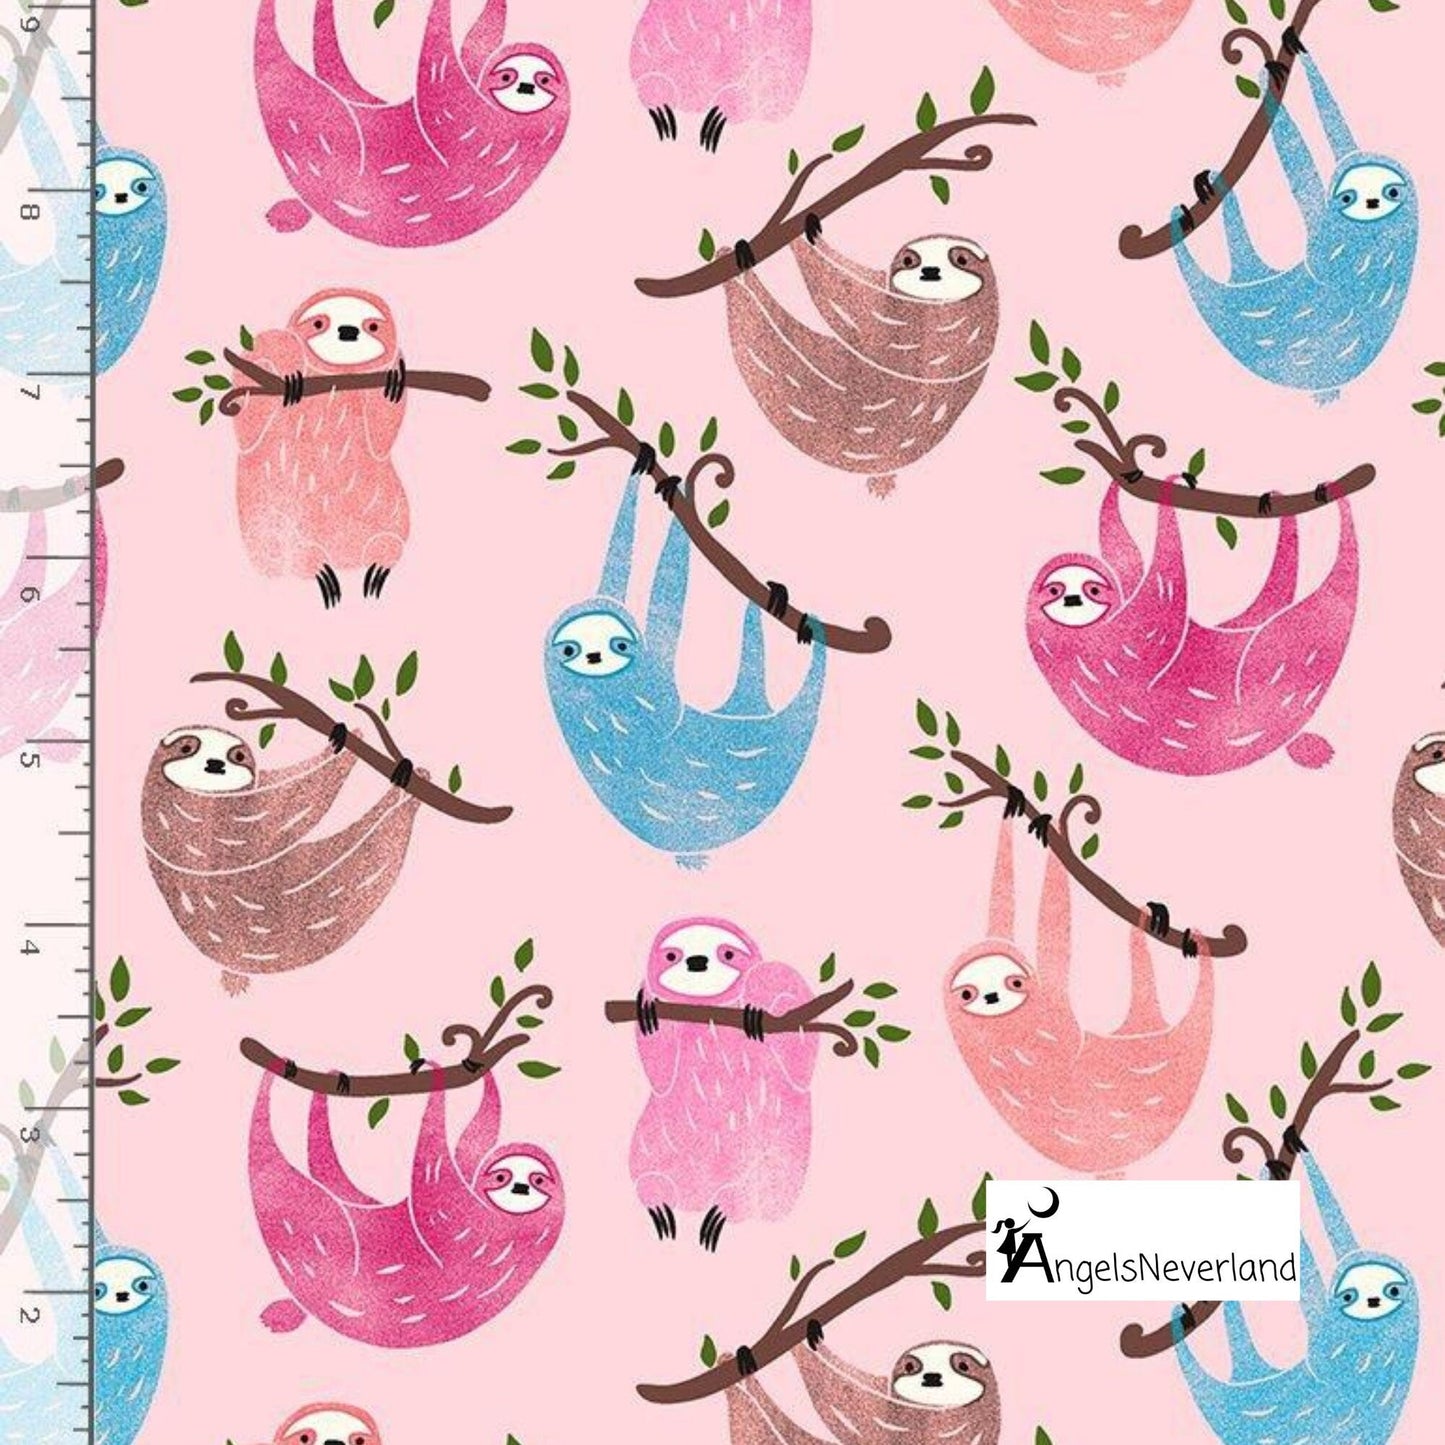 Timeless Treasures Fabric 2 yards (72"x44") / All over Sloths Timeless Treasures All over sloths fabric or small pink hearts fabric